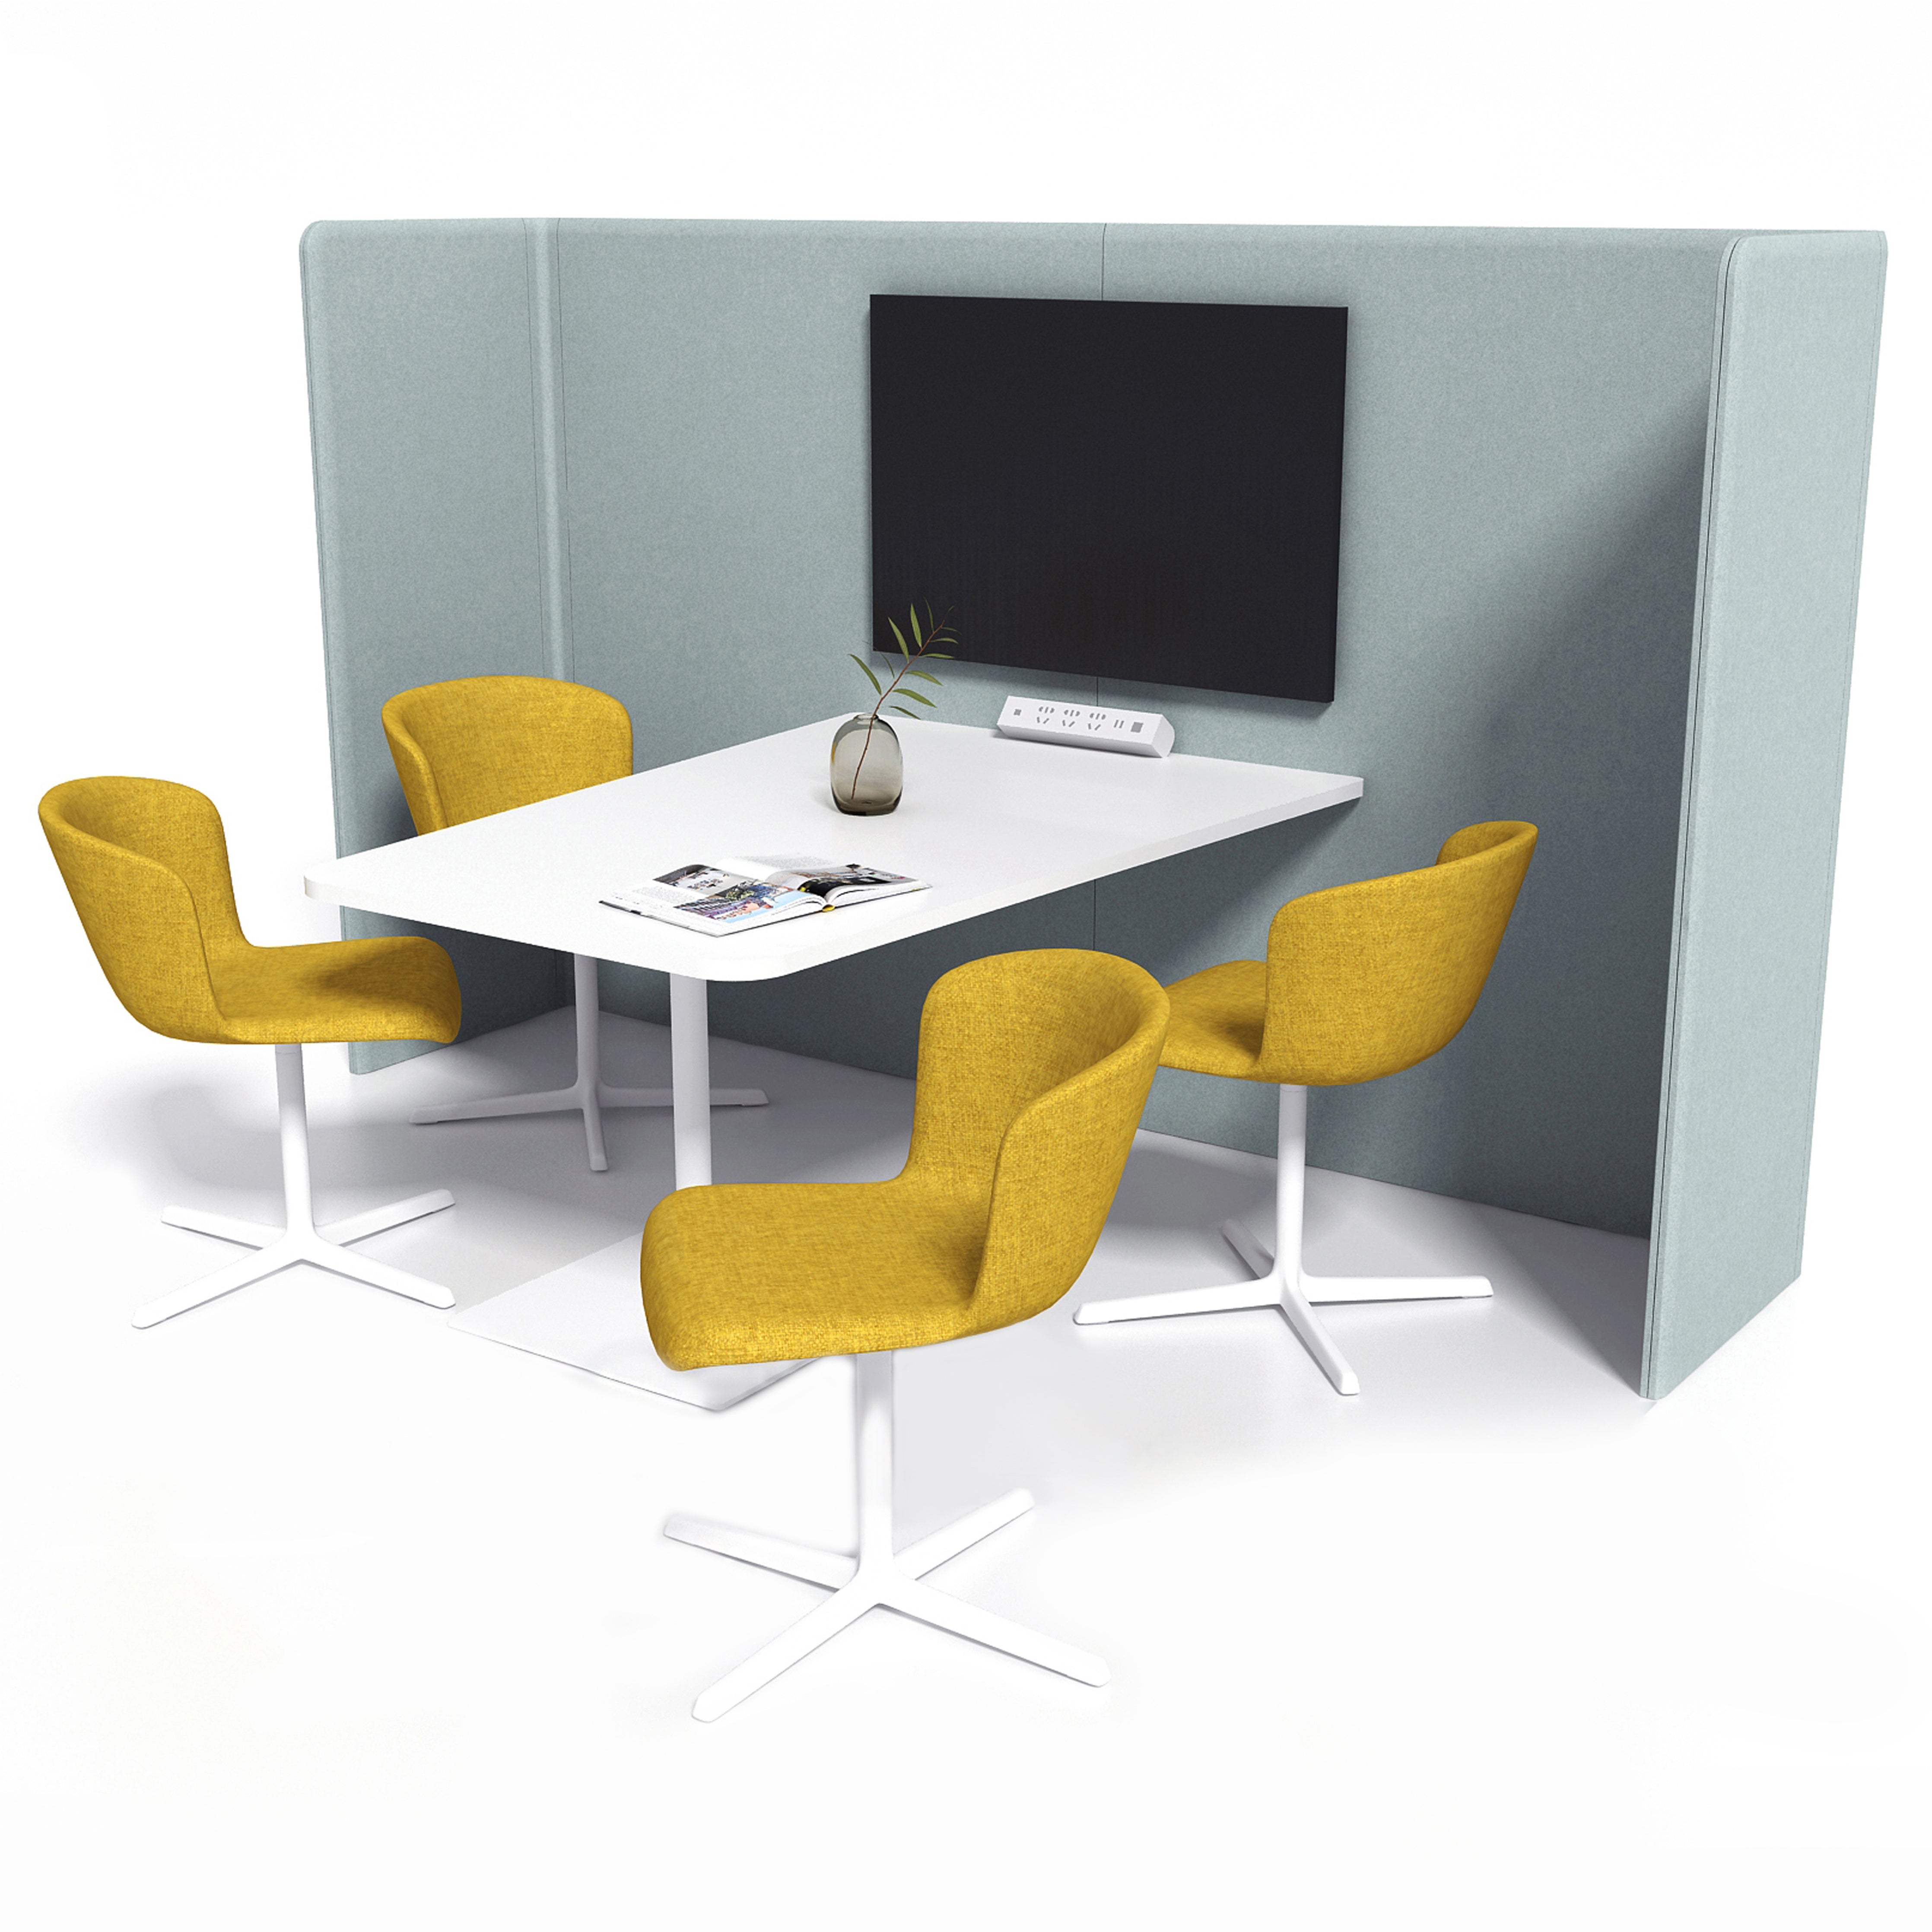 Bequiet I - Privacy Meeting Pod with Table